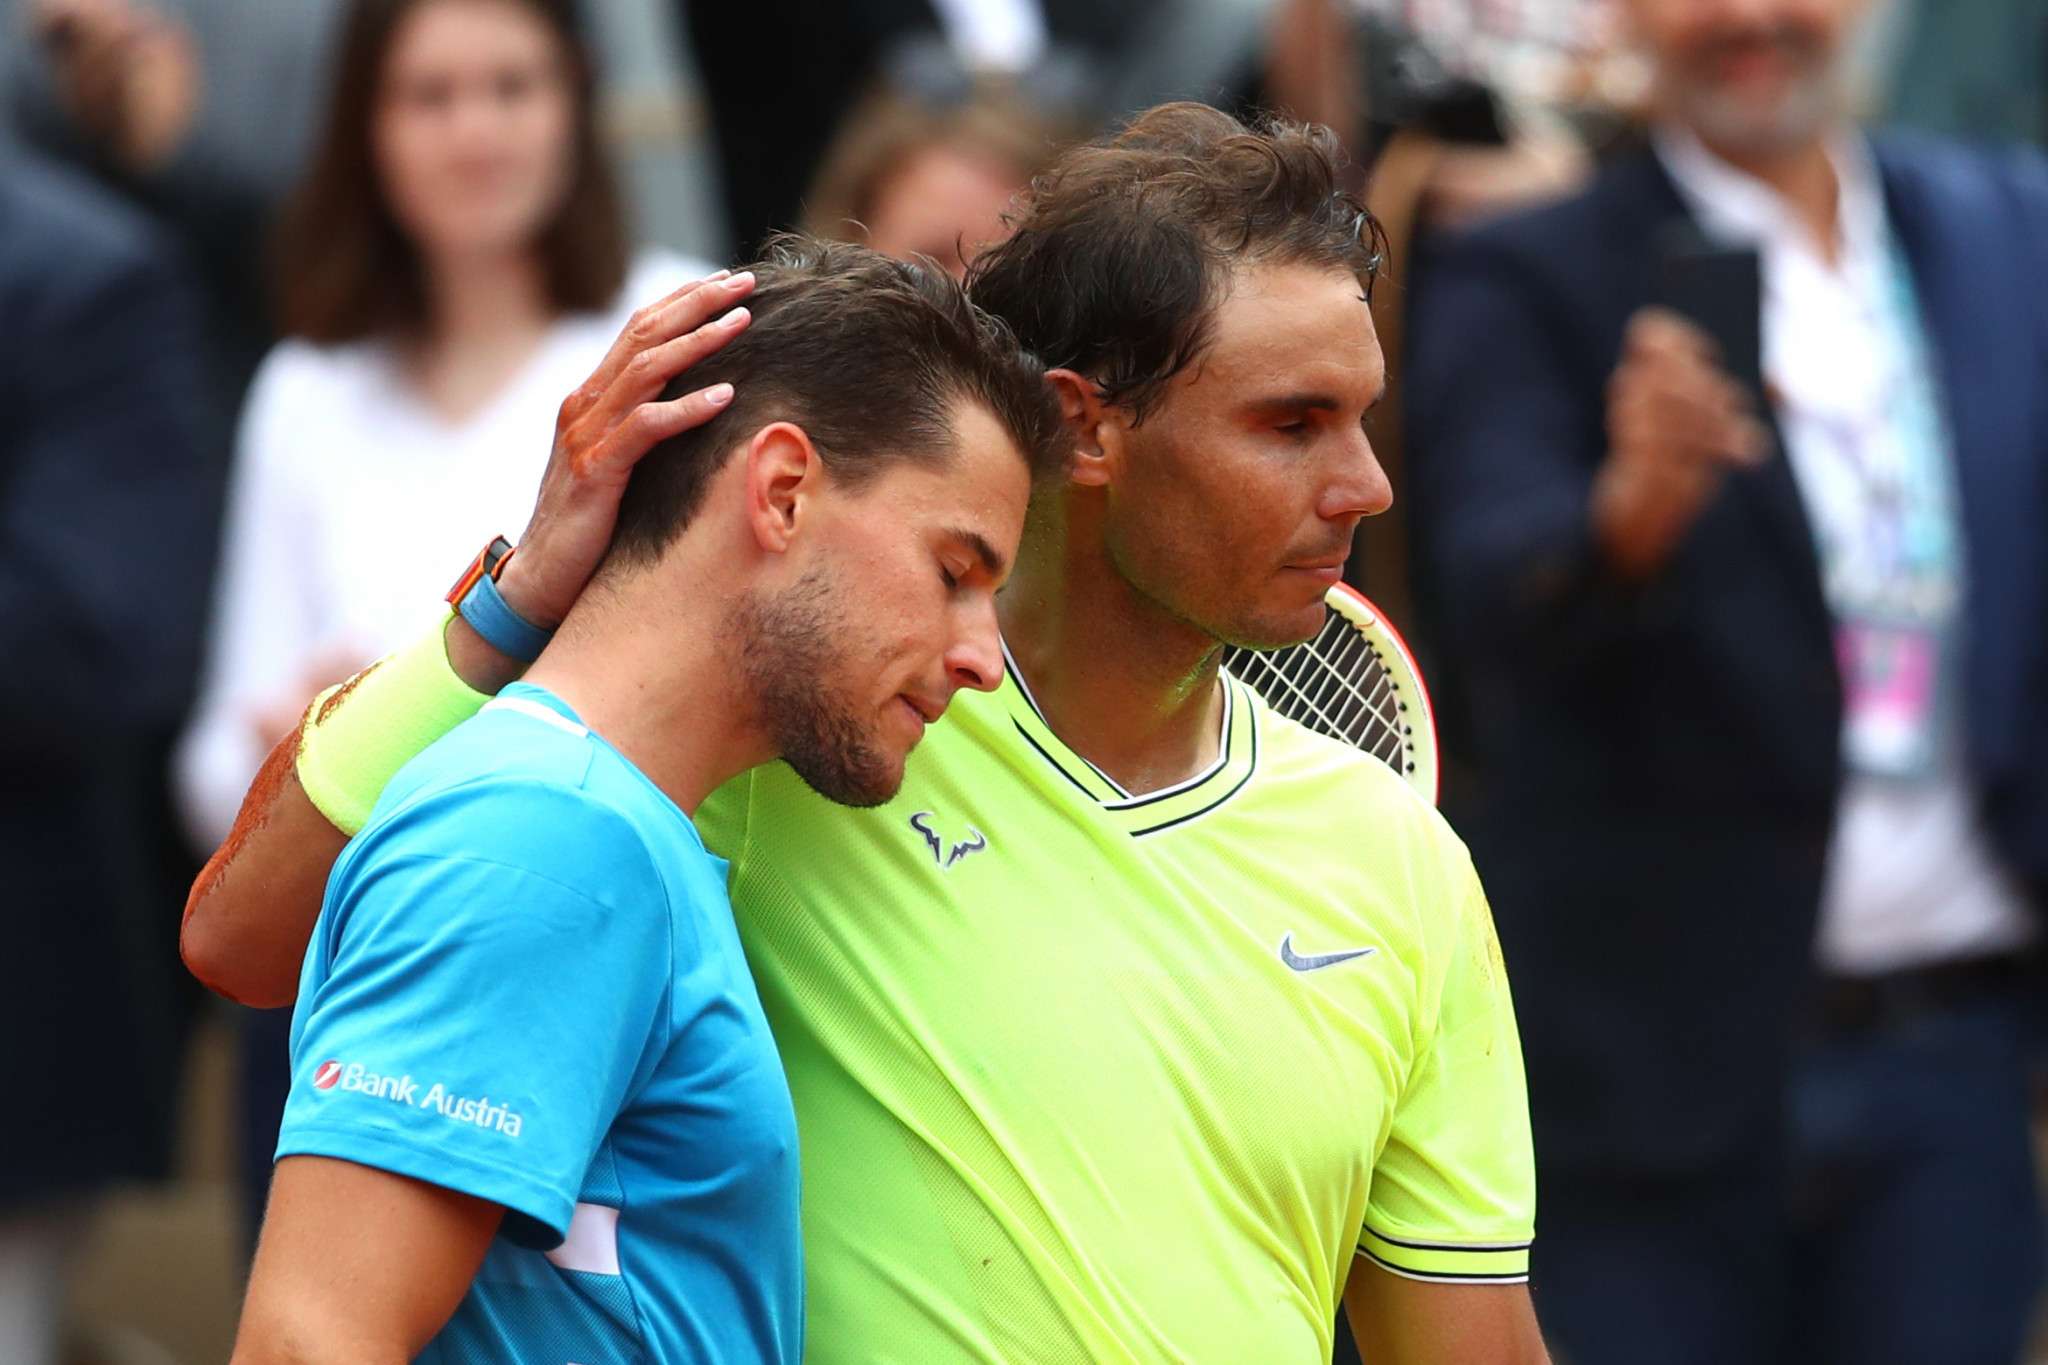 Spain's Rafael Nadal consoles Dominic Thiem after defeating the Austrian in the French Open Final for a second successive year to claim a record 12th title at the event ©Getty Images